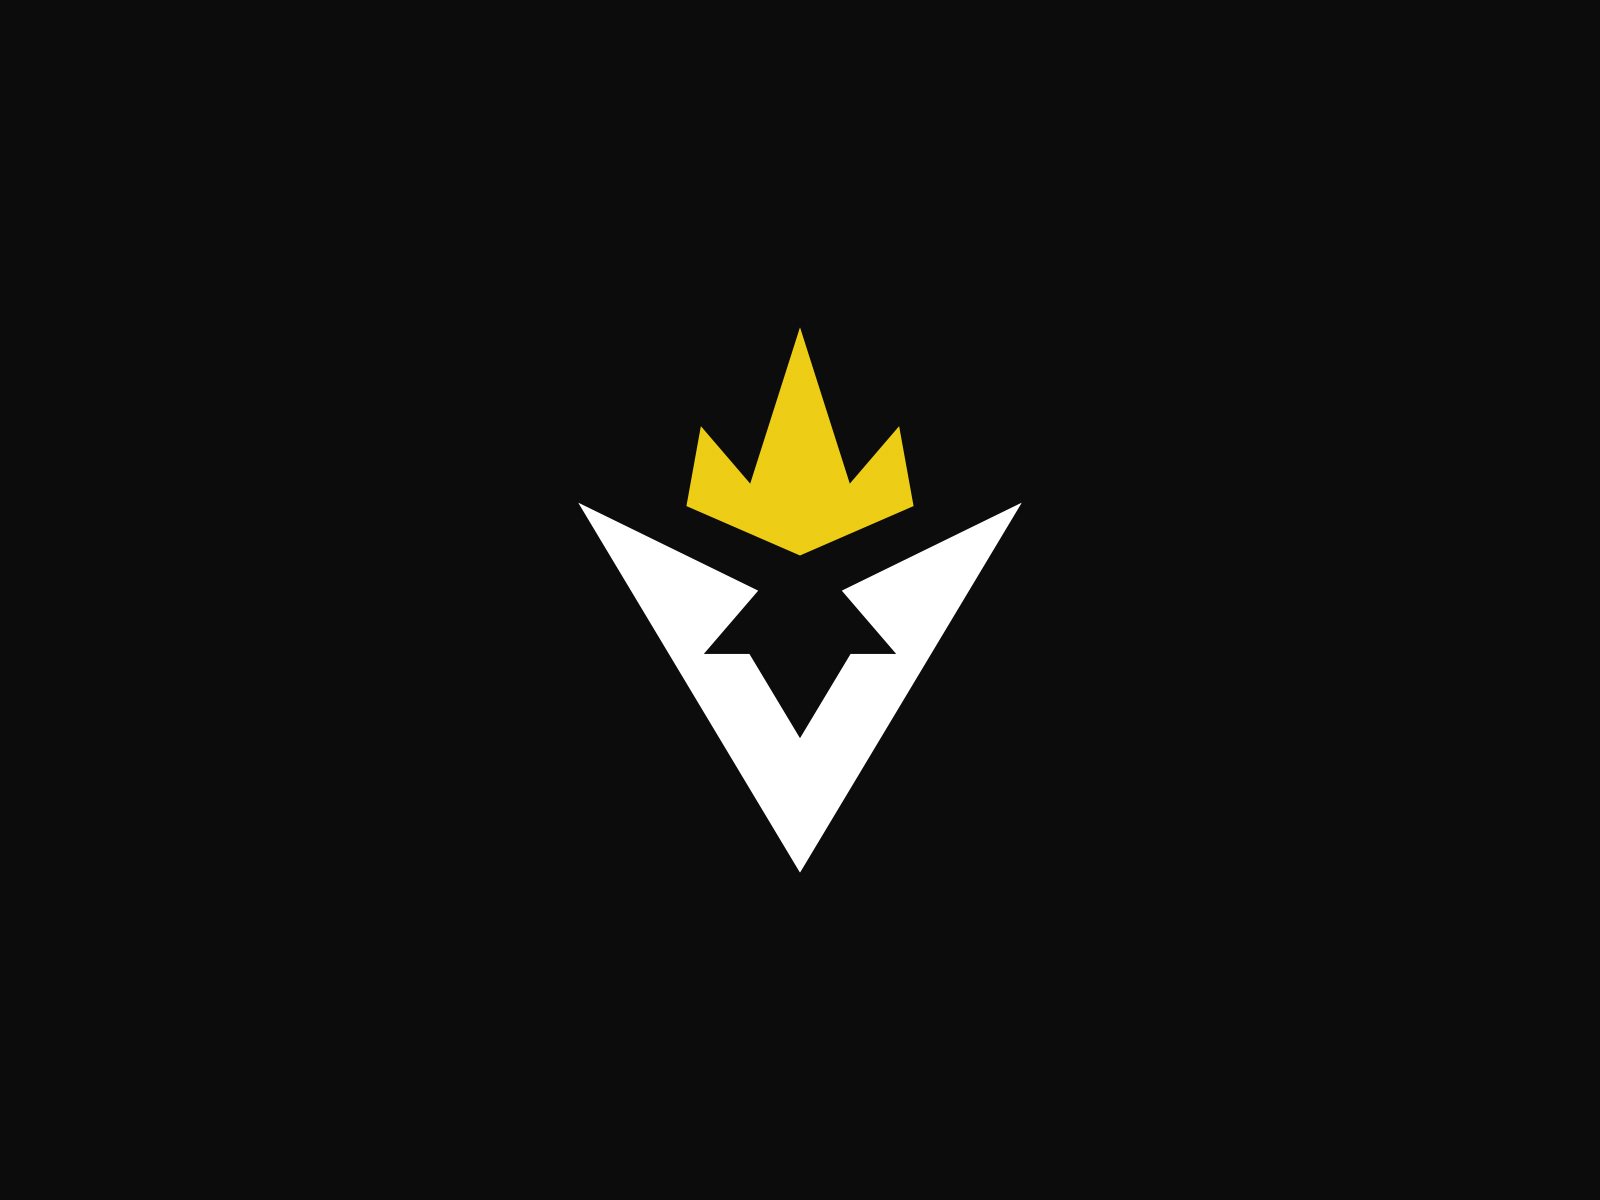 V.Crowned by Hawk on Dribbble